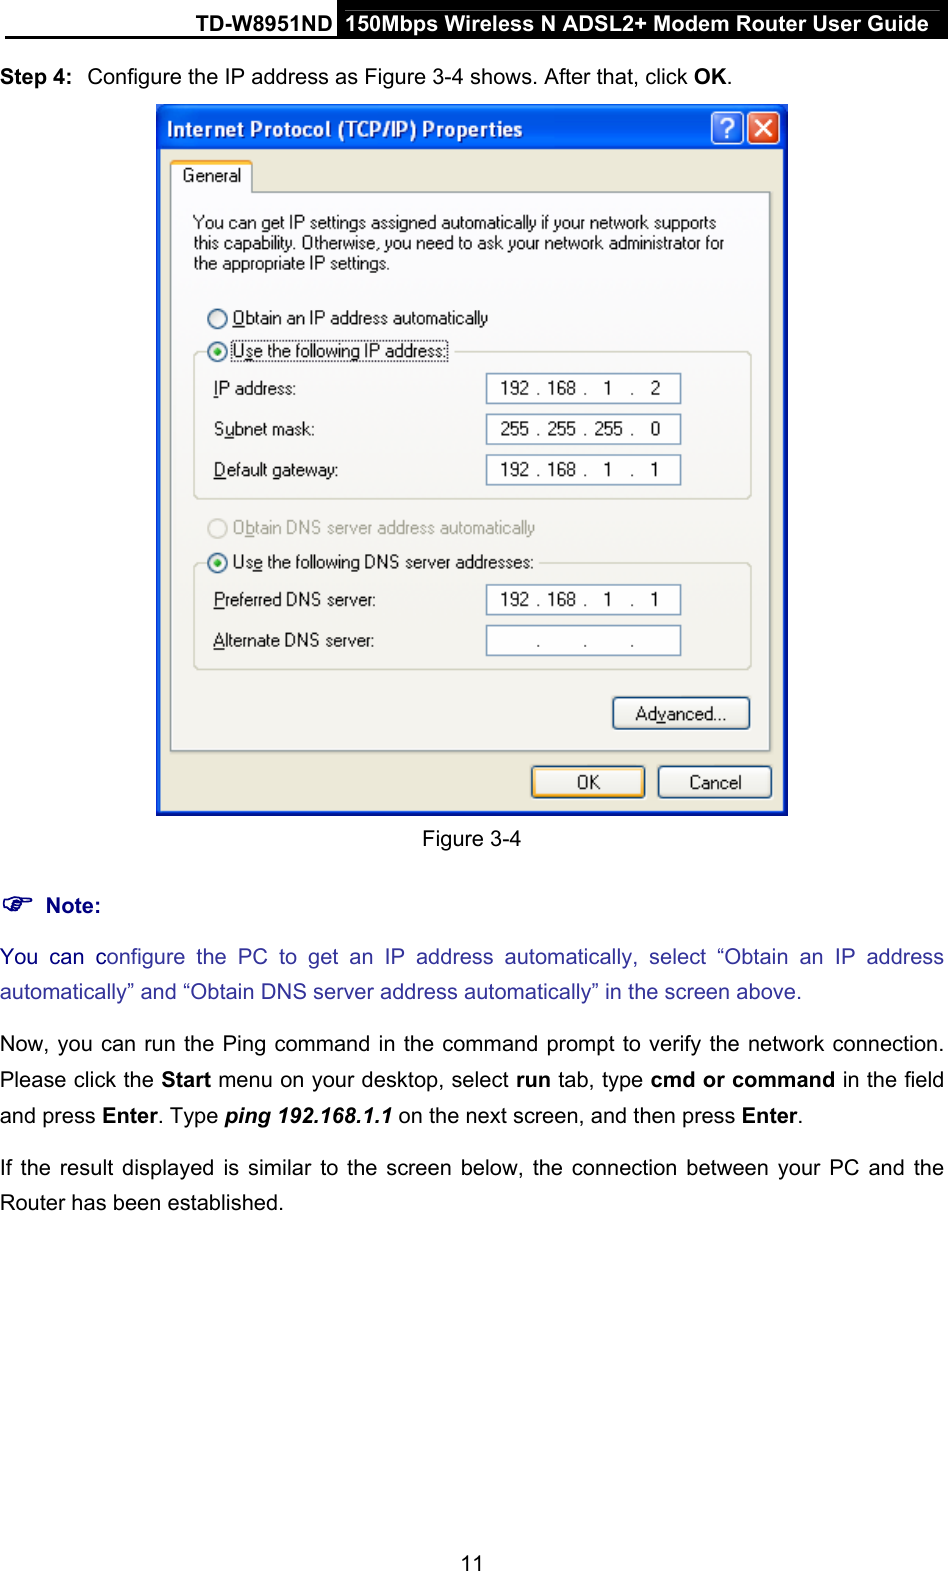 TD-W8951ND  150Mbps Wireless N ADSL2+ Modem Router User Guide Step 4:  Configure the IP address as Figure 3-4 shows. After that, click OK.  Figure 3-4 ) Note: You can configure the PC to get an IP address automatically, select “Obtain an IP address automatically” and “Obtain DNS server address automatically” in the screen above.   Now, you can run the Ping command in the command prompt to verify the network connection. Please click the Start menu on your desktop, select run tab, type cmd or command in the field and press Enter. Type ping 192.168.1.1 on the next screen, and then press Enter. If the result displayed is similar to the screen below, the connection between your PC and the Router has been established. 11 